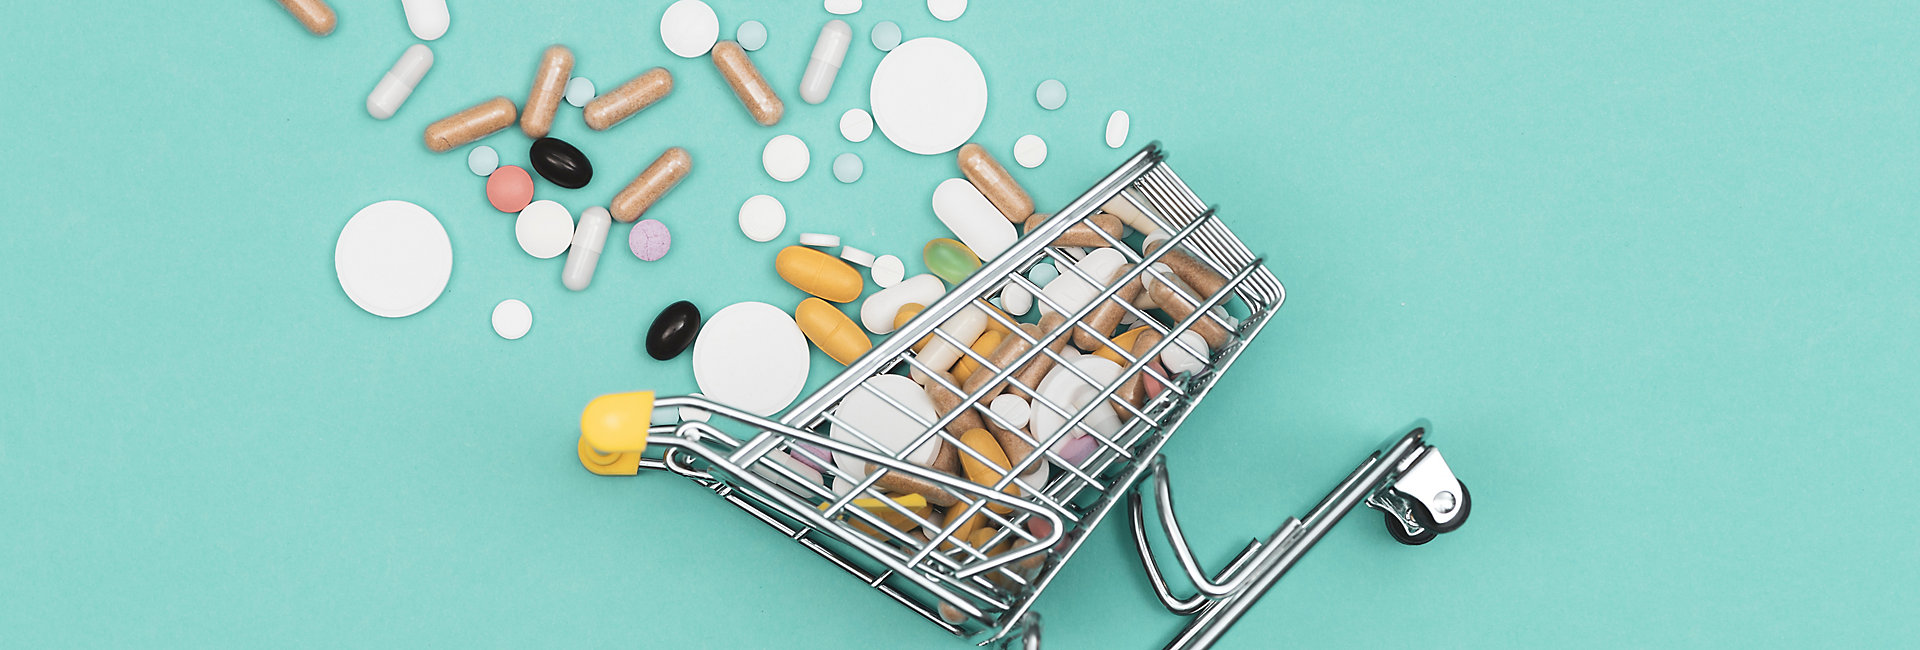 Miniature shopping cart filled with pills, tablets and capsules: pharmacy shopping, medicine and drug abuse concept; Shutterstock ID 1378202222; purchase_order: -; job: -; client: -